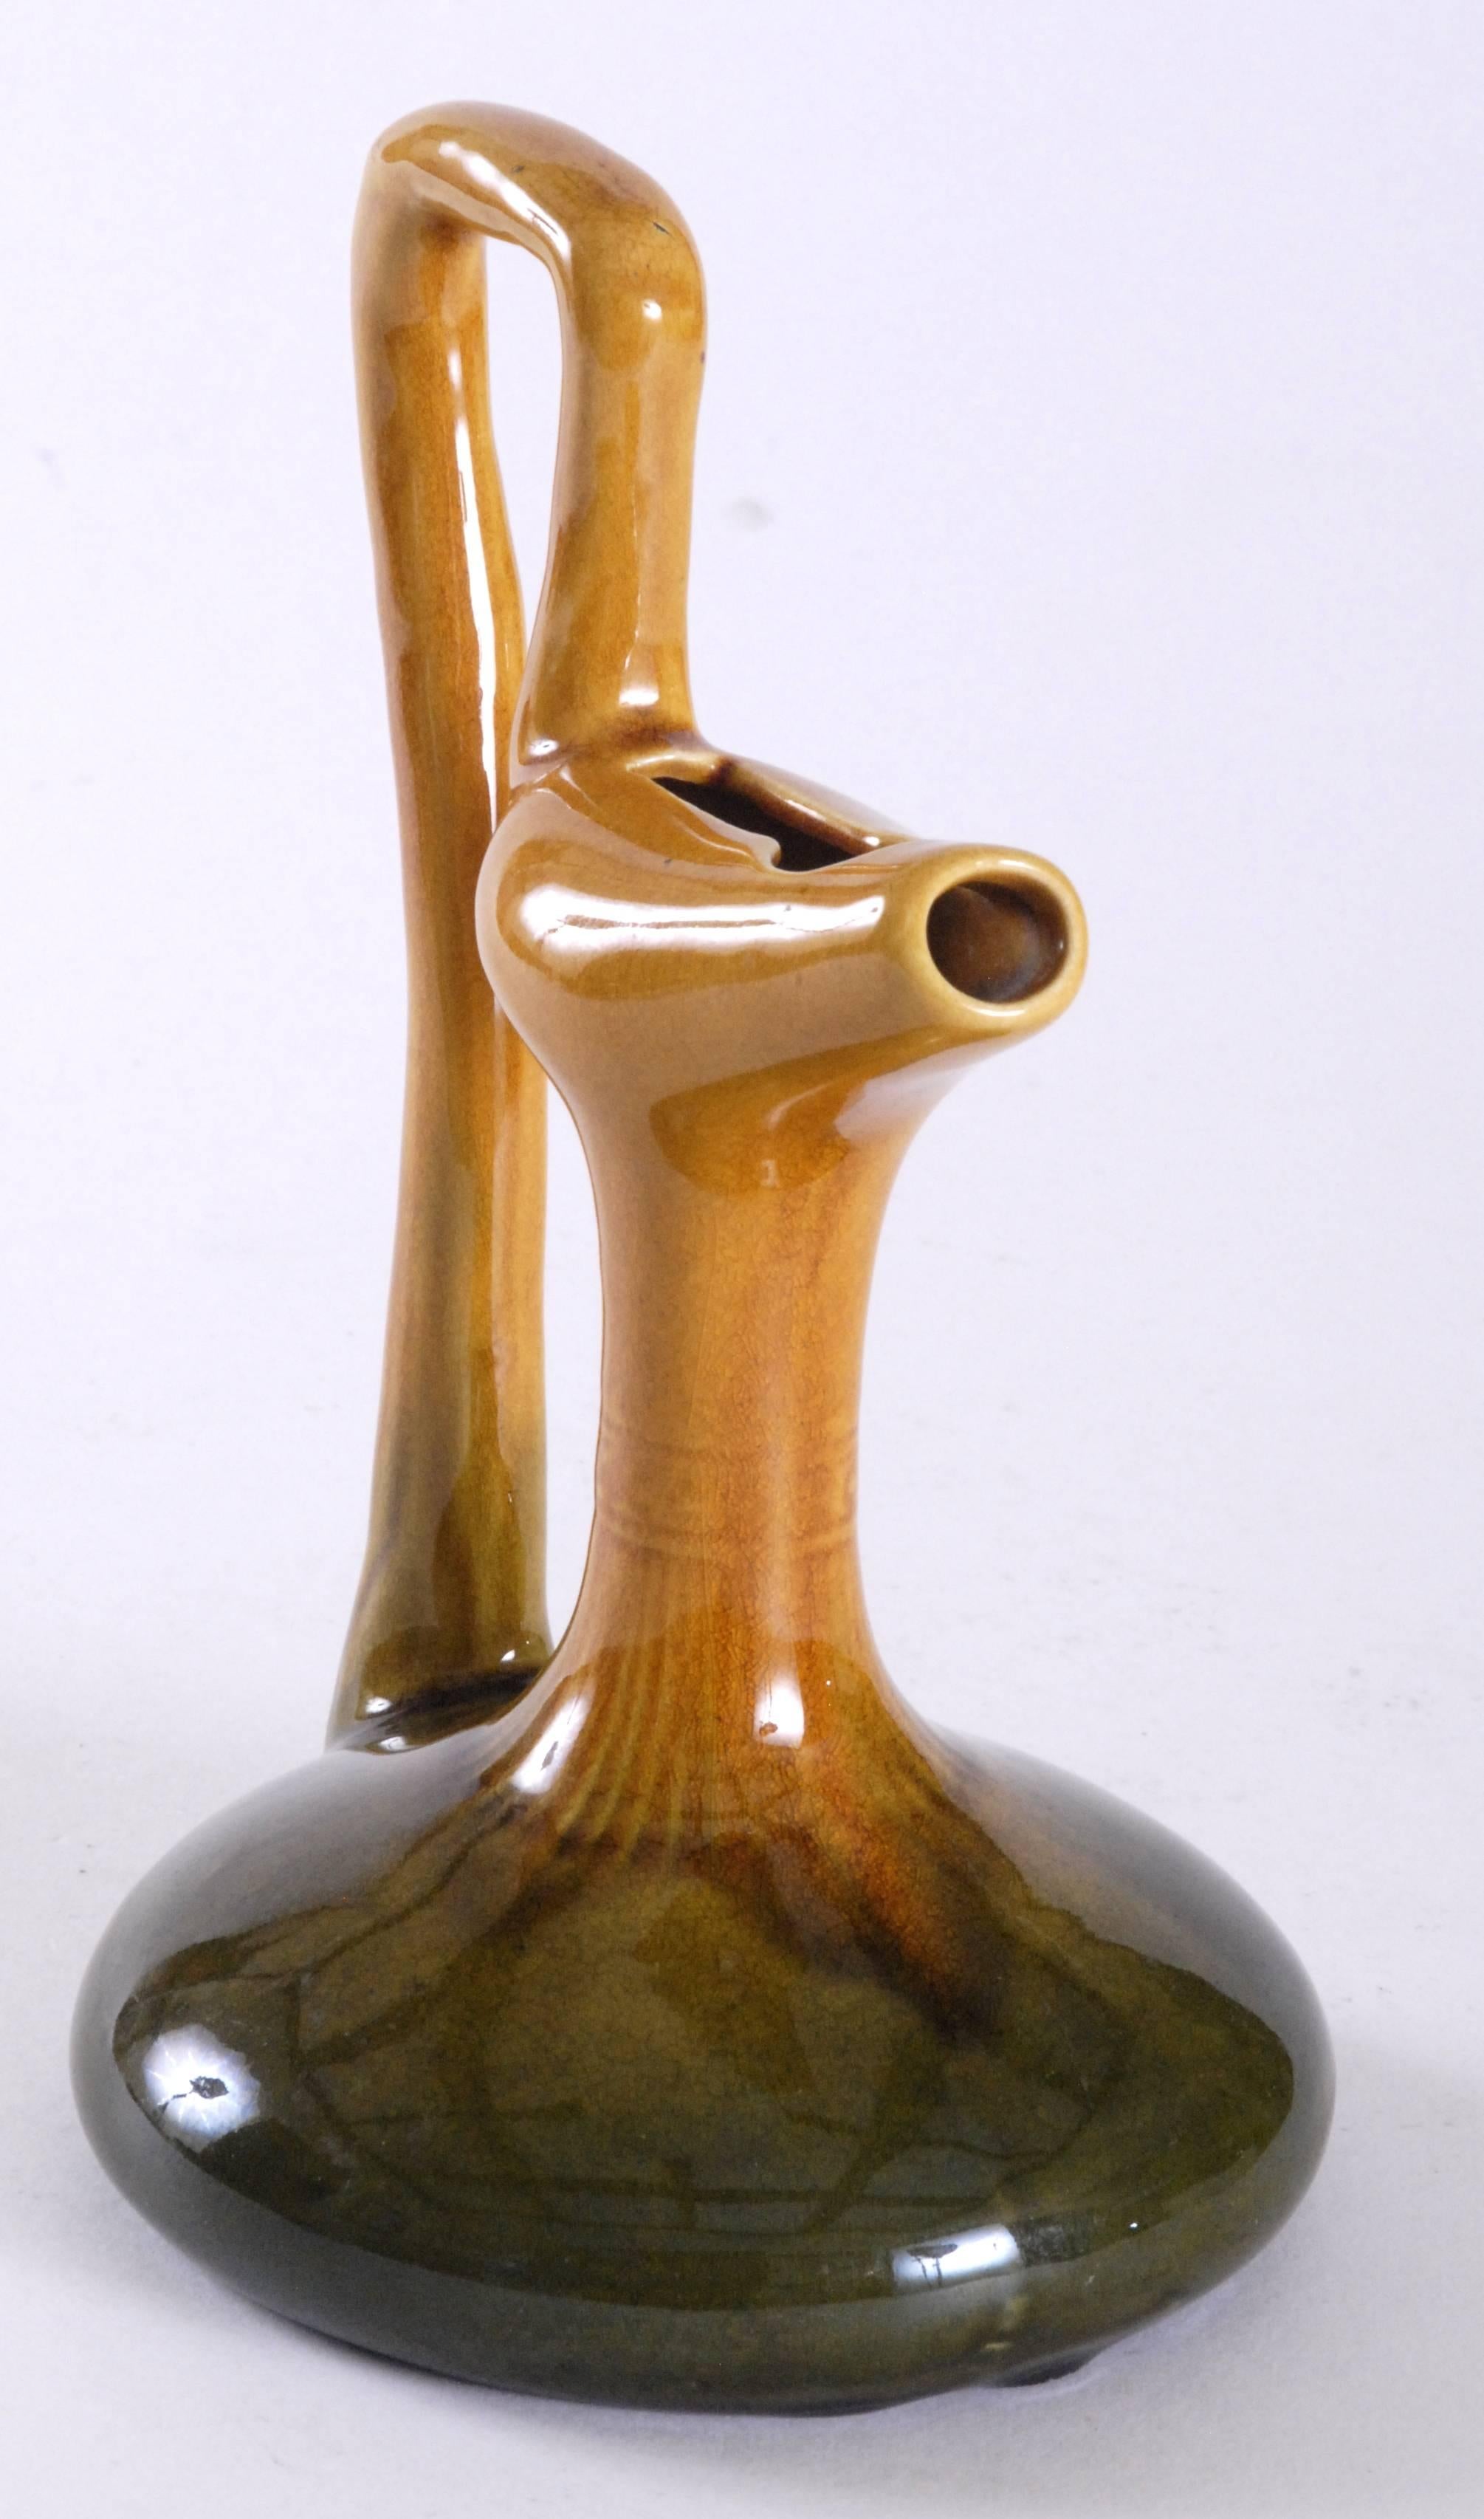 Christopher Dresser designed for the Ault Pottery in the 1890's, taking a lot of inspiration from middle eastern designs, in particular, Persia, of which this an example of a Persian oil ewer. Finely potted with a glorious vibrant glaze of great